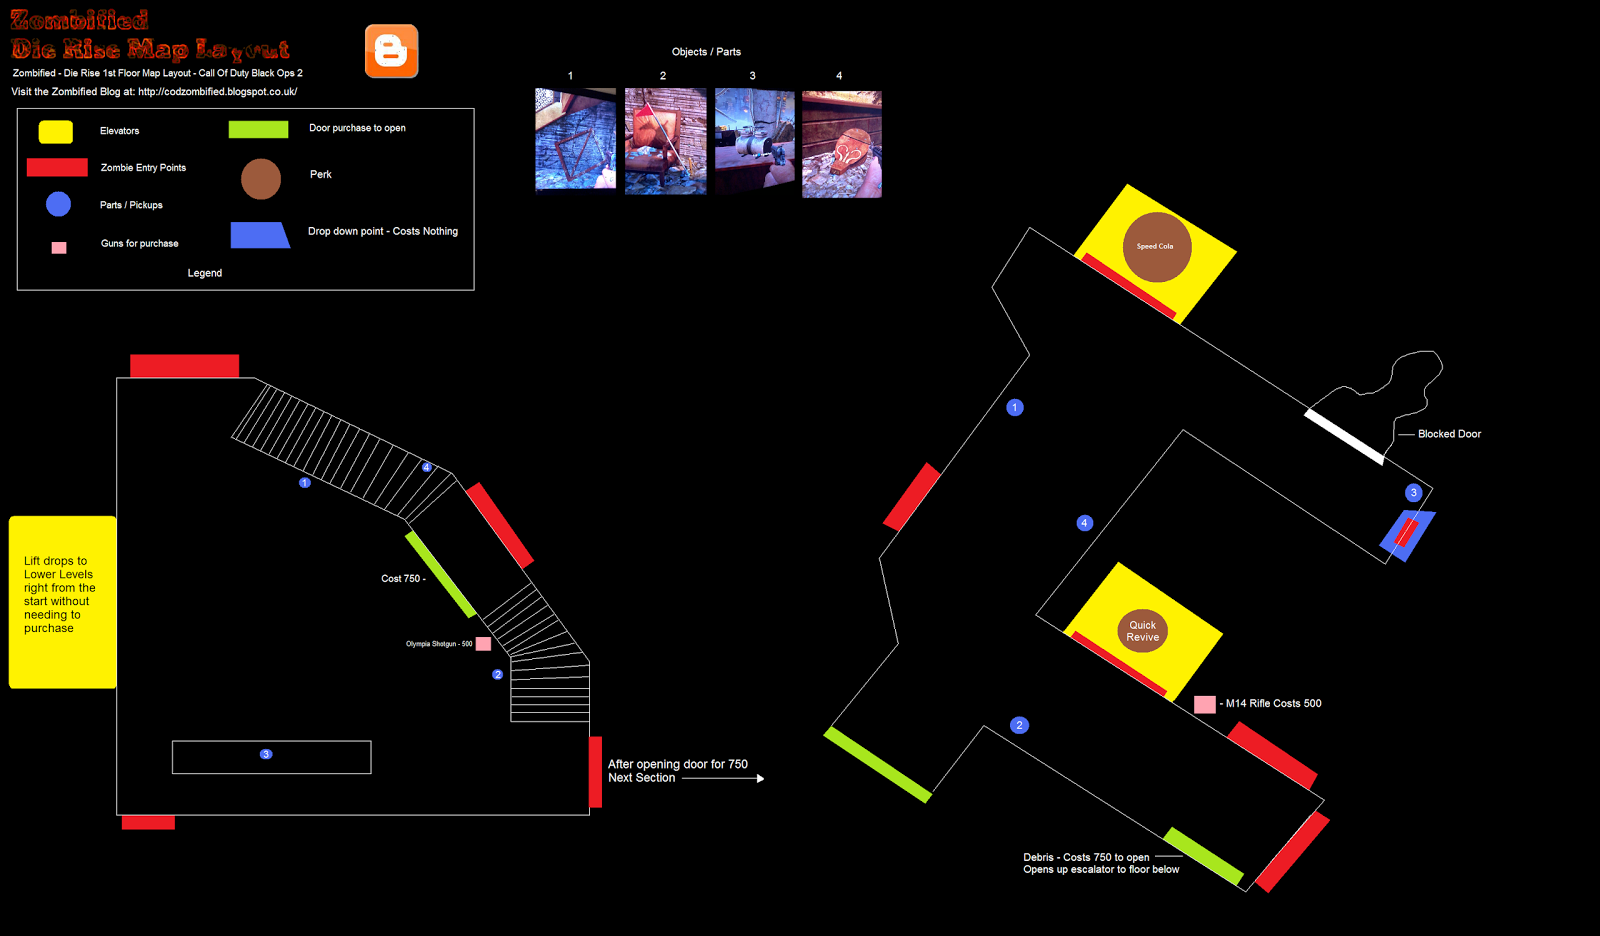 Die Rise Map Layout - Call Of Duty Black Ops 2 Revolution Map pack.